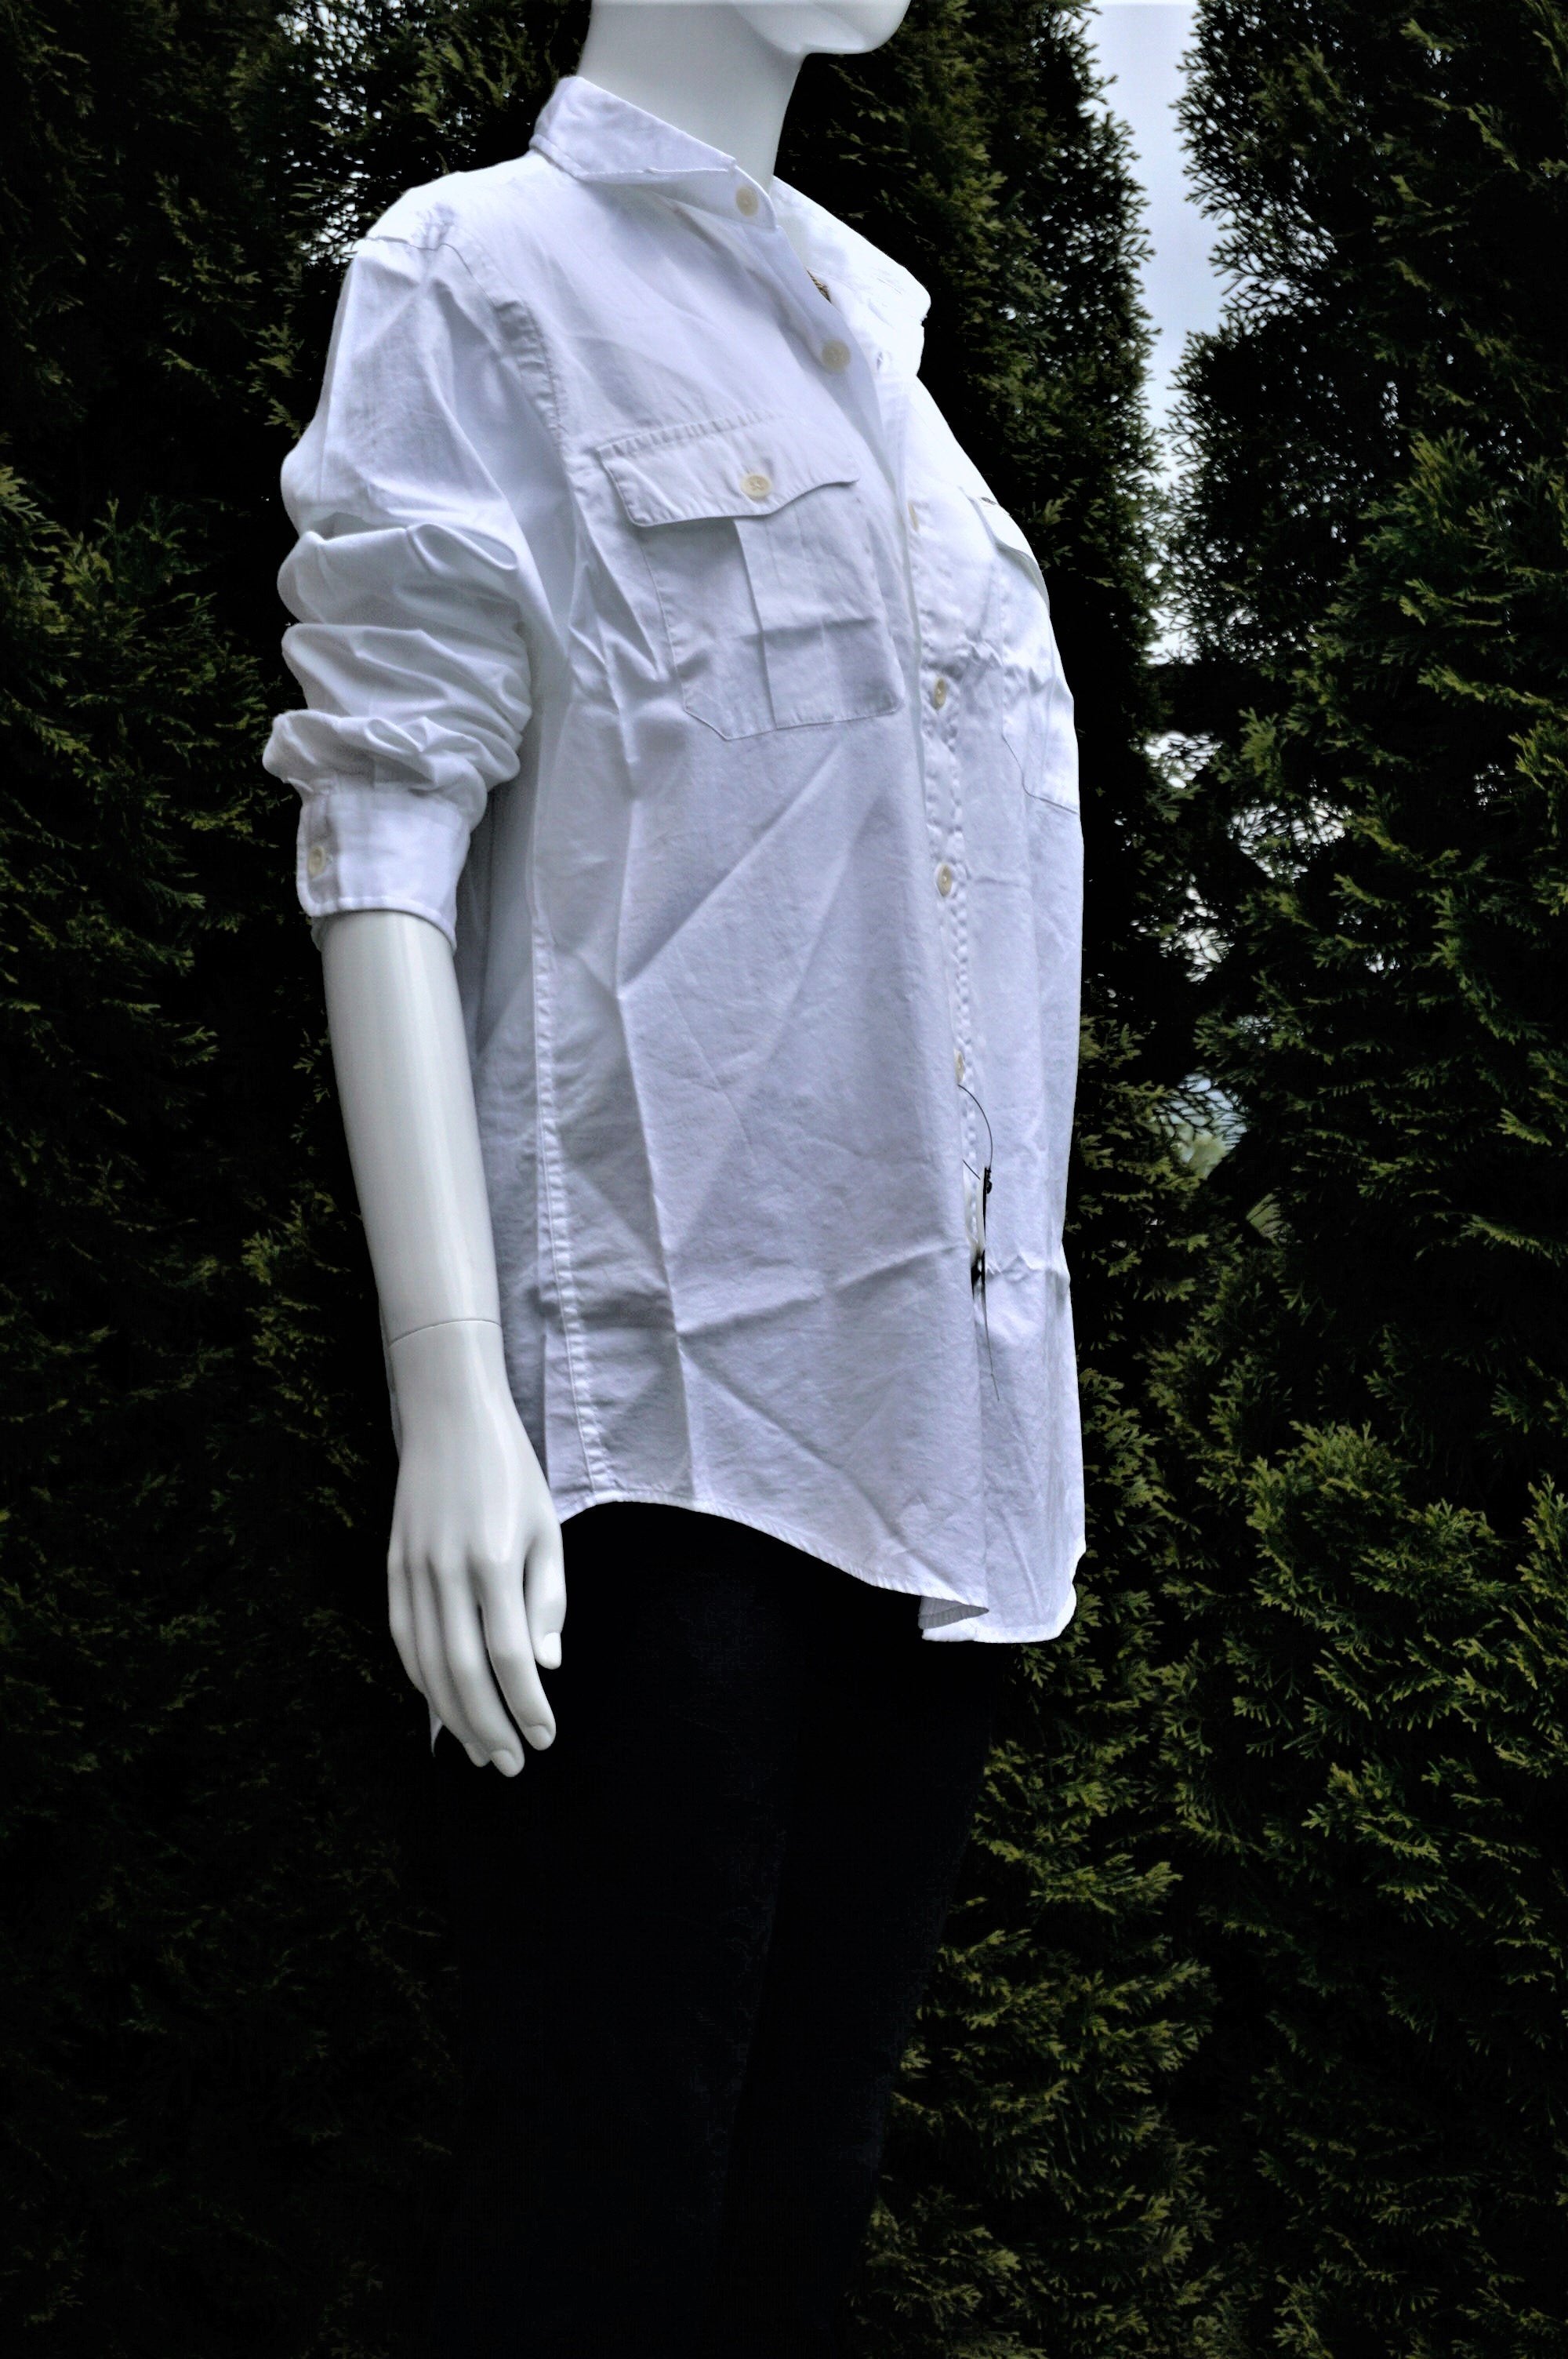 Ralph Lauren Pure Cotton Beach Twill Button Up Shirt, Simple, comfy and classic. Premium quality brand new shirt with tag still attached. Grab it before it's gone;), White, 100% Cotton, women's Tops, women's White Tops, Ralph Lauren women's Tops, classic button up white shirt, boyfriend shirt, white shirt, beach twill shirt